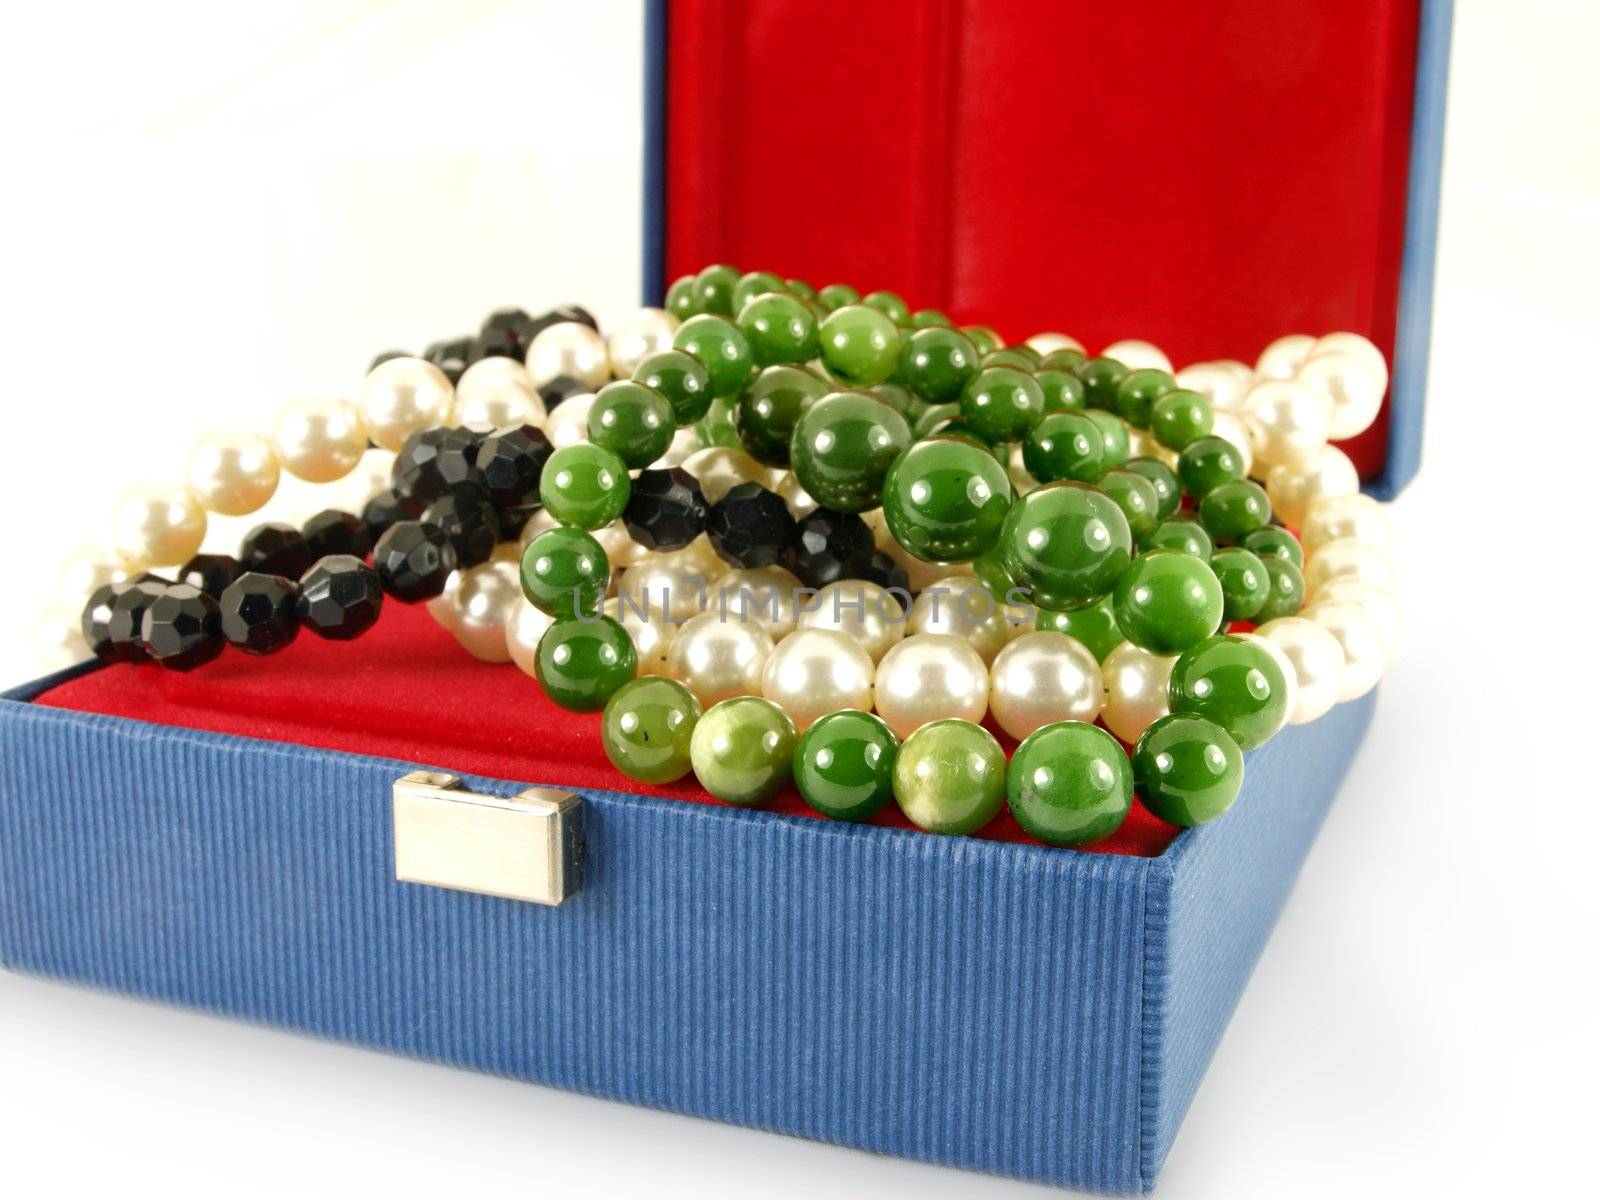 Green emerald gemstone over white and black pearl necklace, in a jewelry box, isolated towards white background